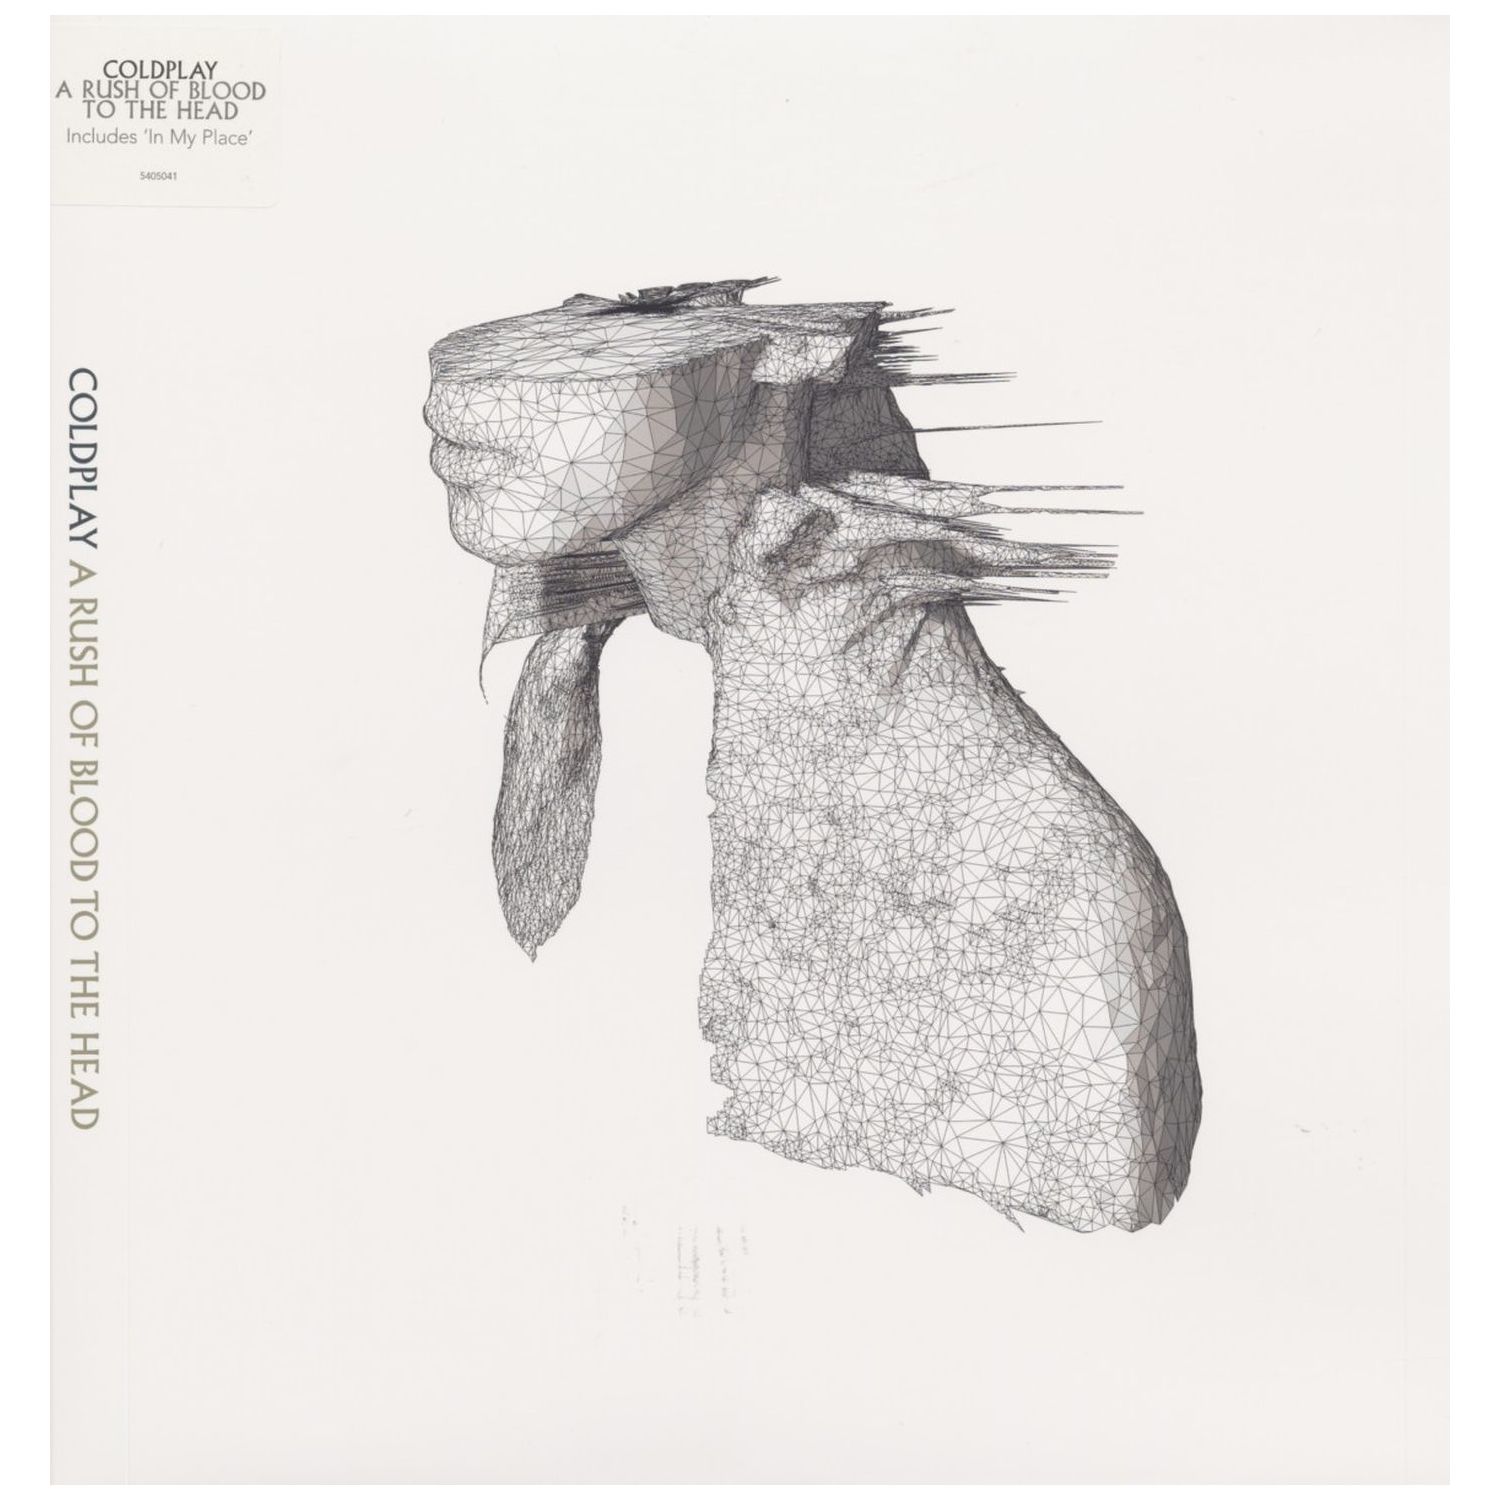 A RUSH OF BLOOD TO THE HEAD -- COLDPLAY